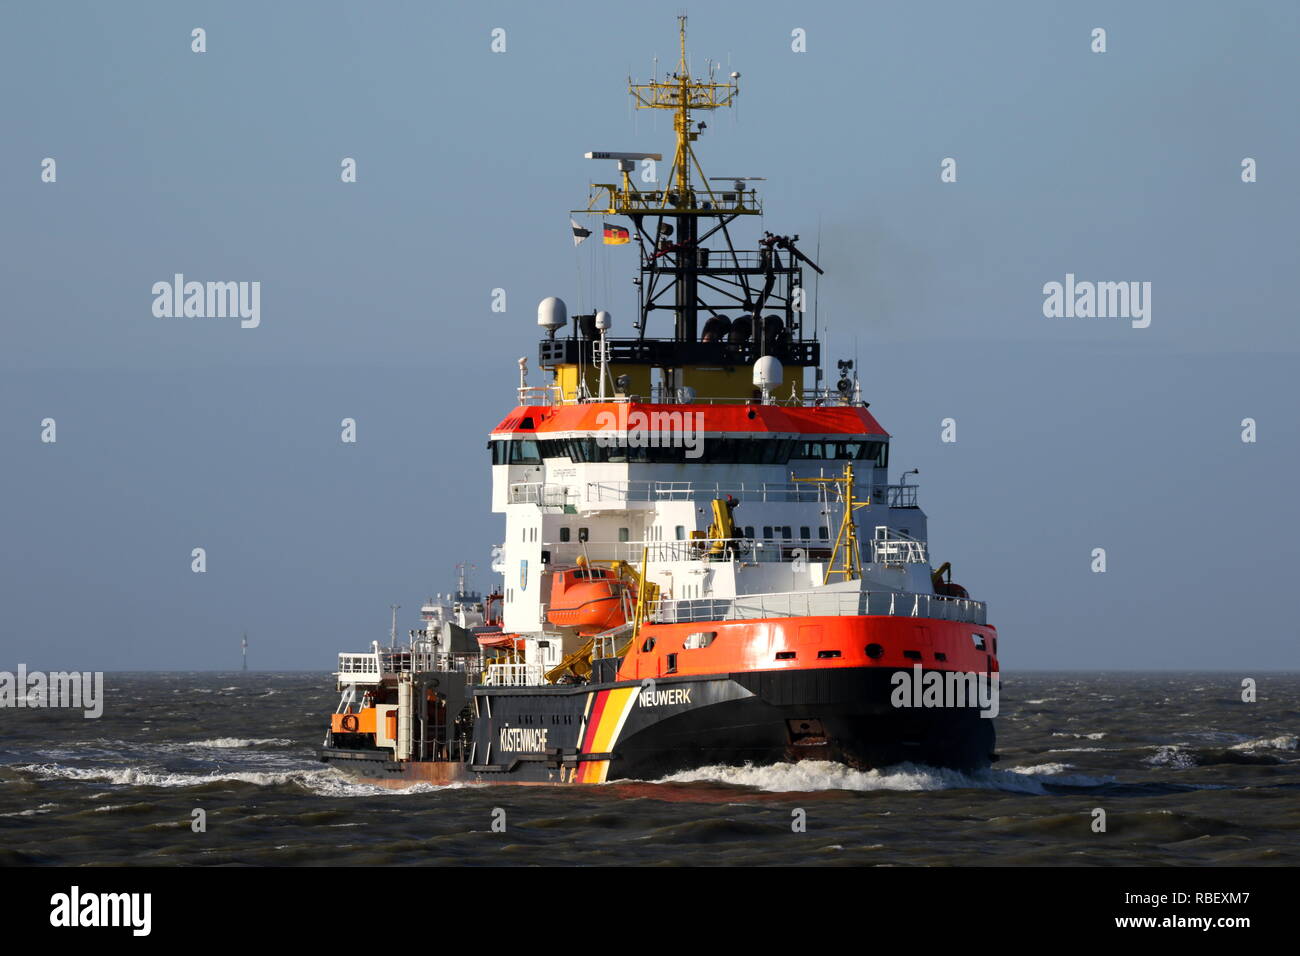 The ship of the Coast Guard Neuwerk reaches the port of Cuxhaven on March 20, 2016. Stock Photo